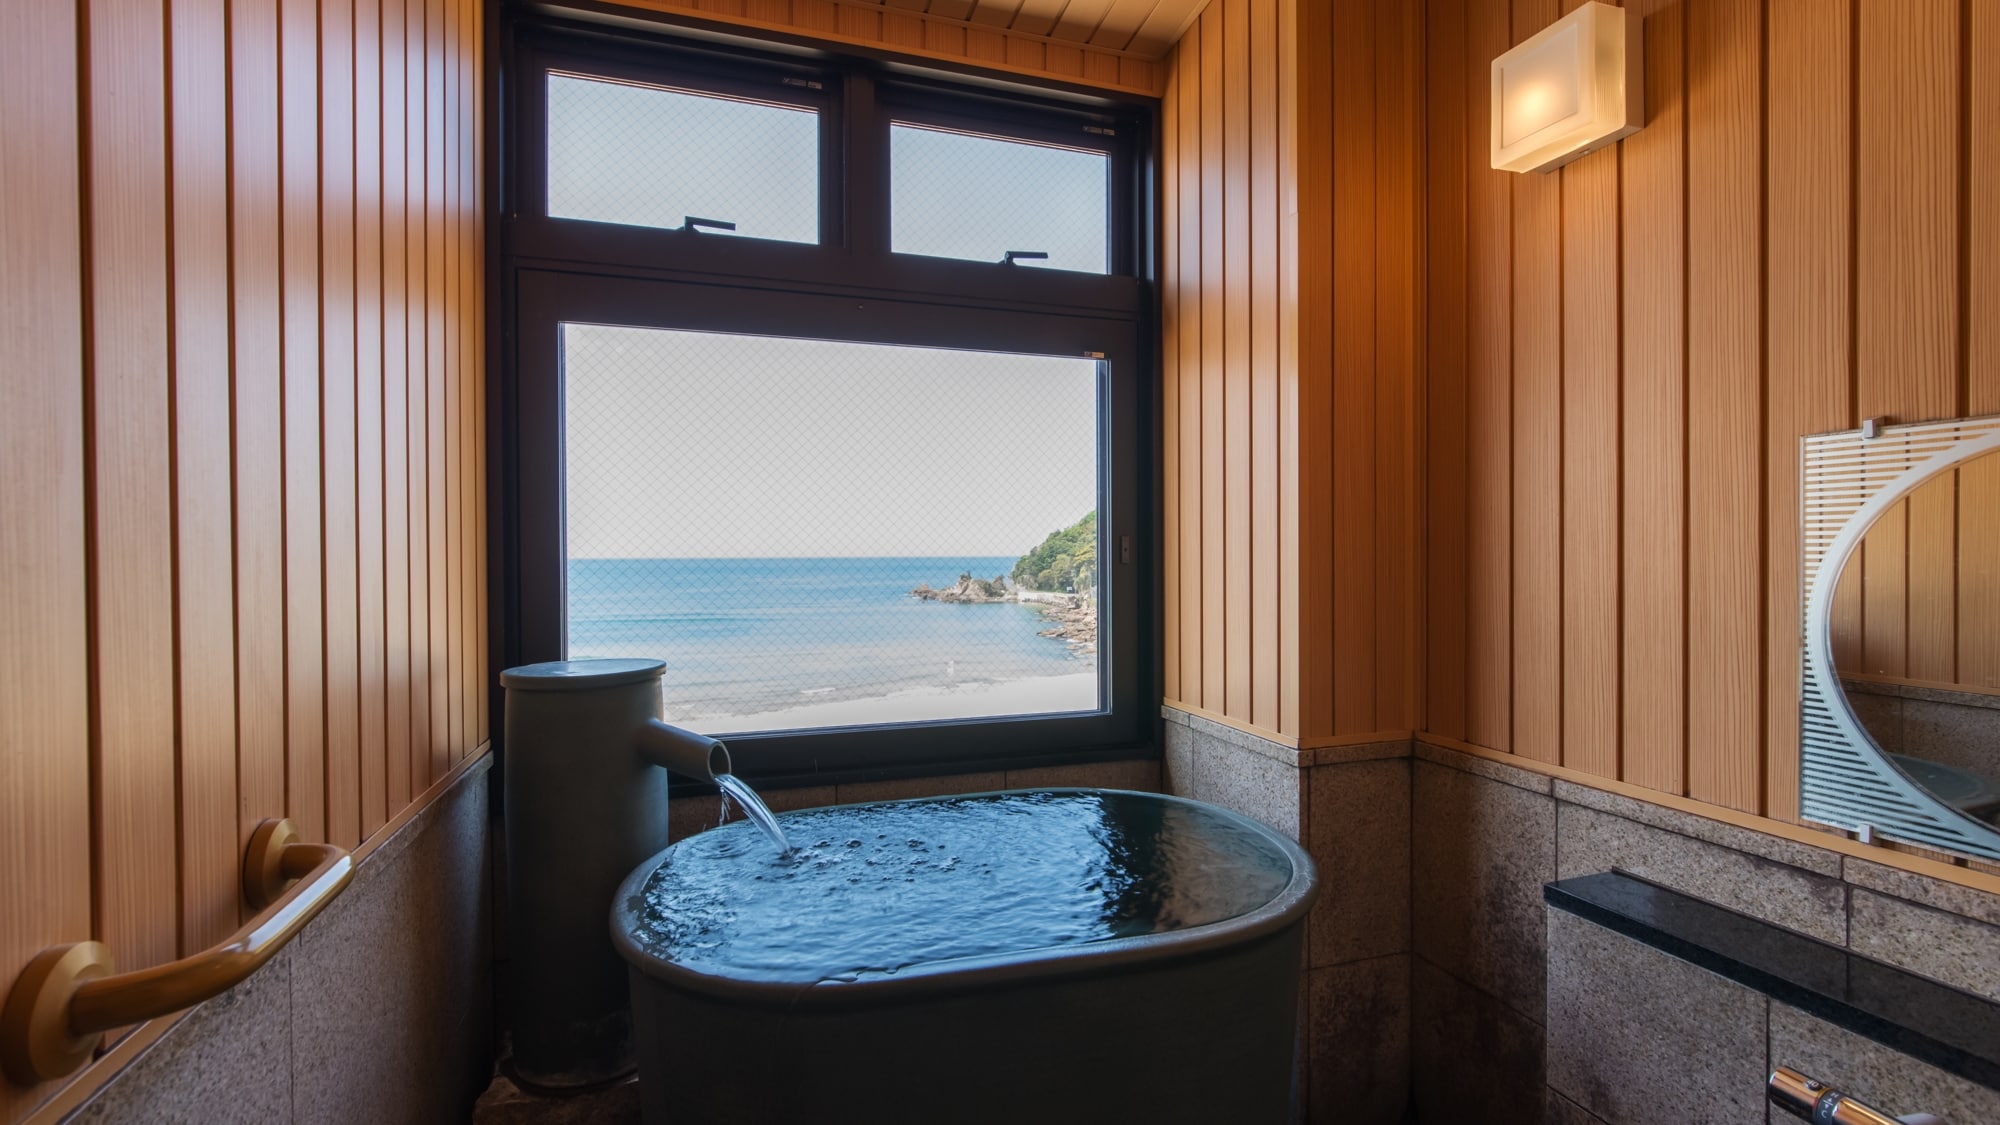 You can enjoy bathing while gazing at the beautiful ocean view from the observation bath in the annex guest room.